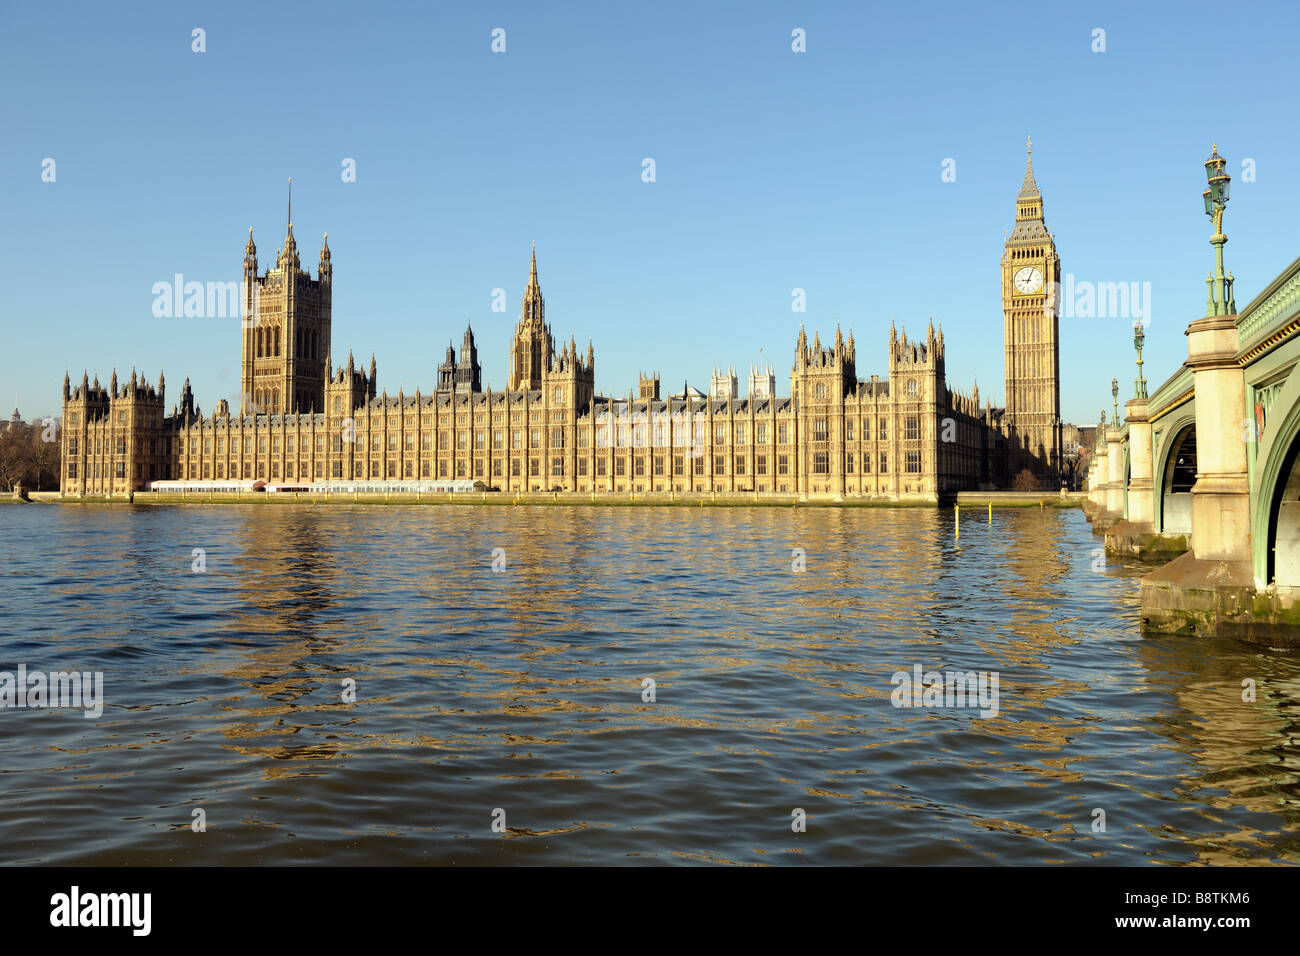 Palace of Westminster over the Thames with Big Ben and Westminster Bridge on the right in morning light and a clear blue sky Stock Photo